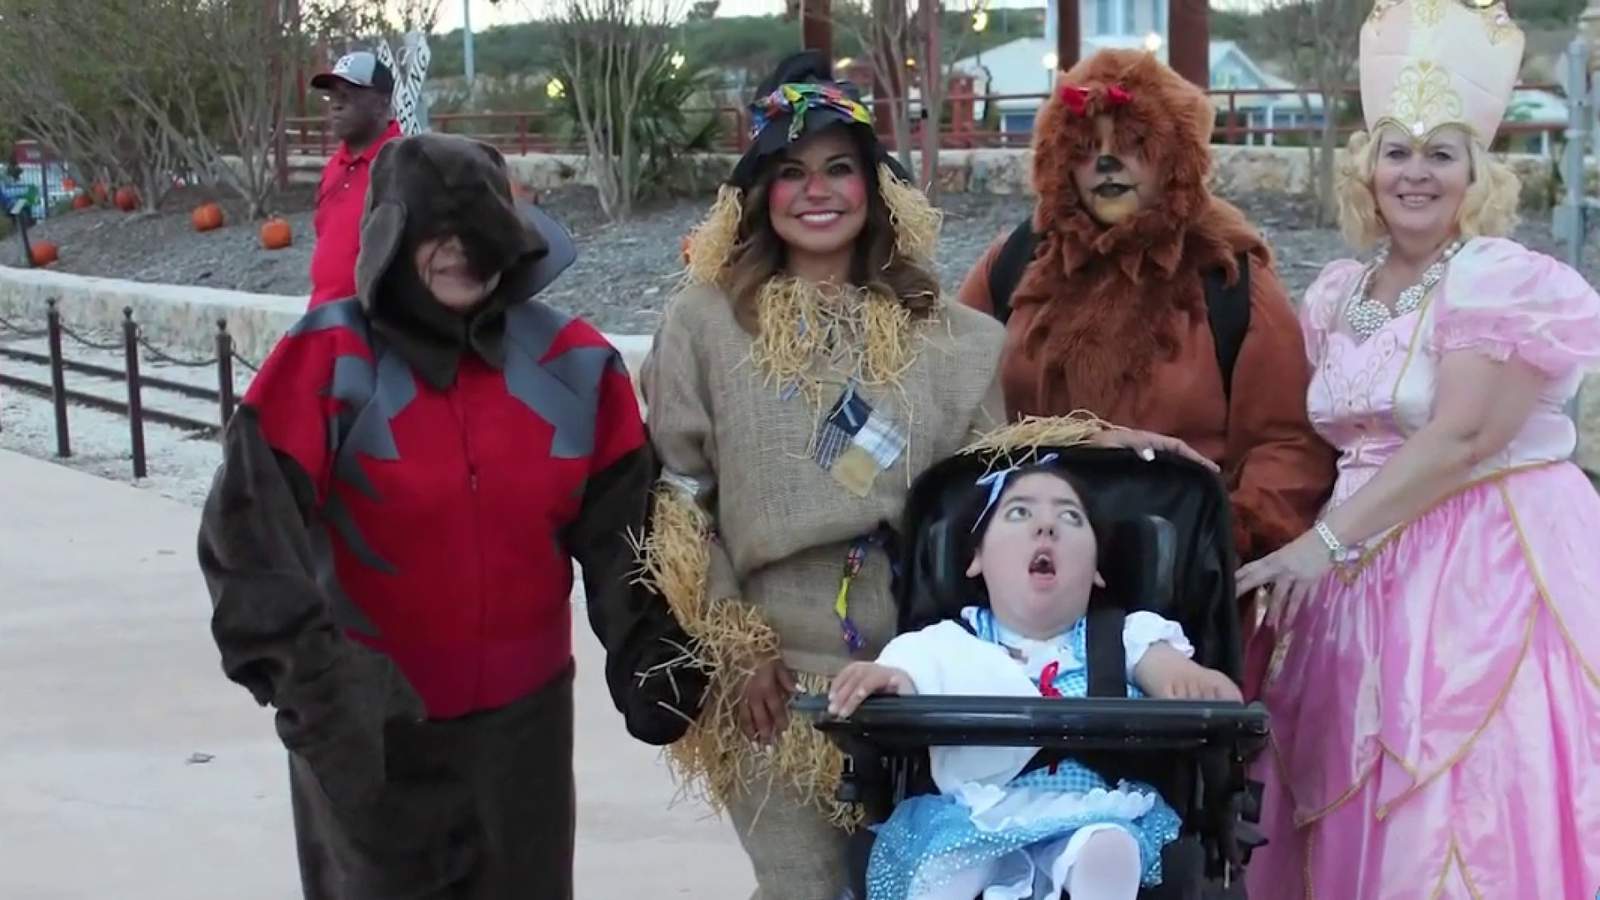 Weekend plans? This Halloween drive-thru event is set for Saturday